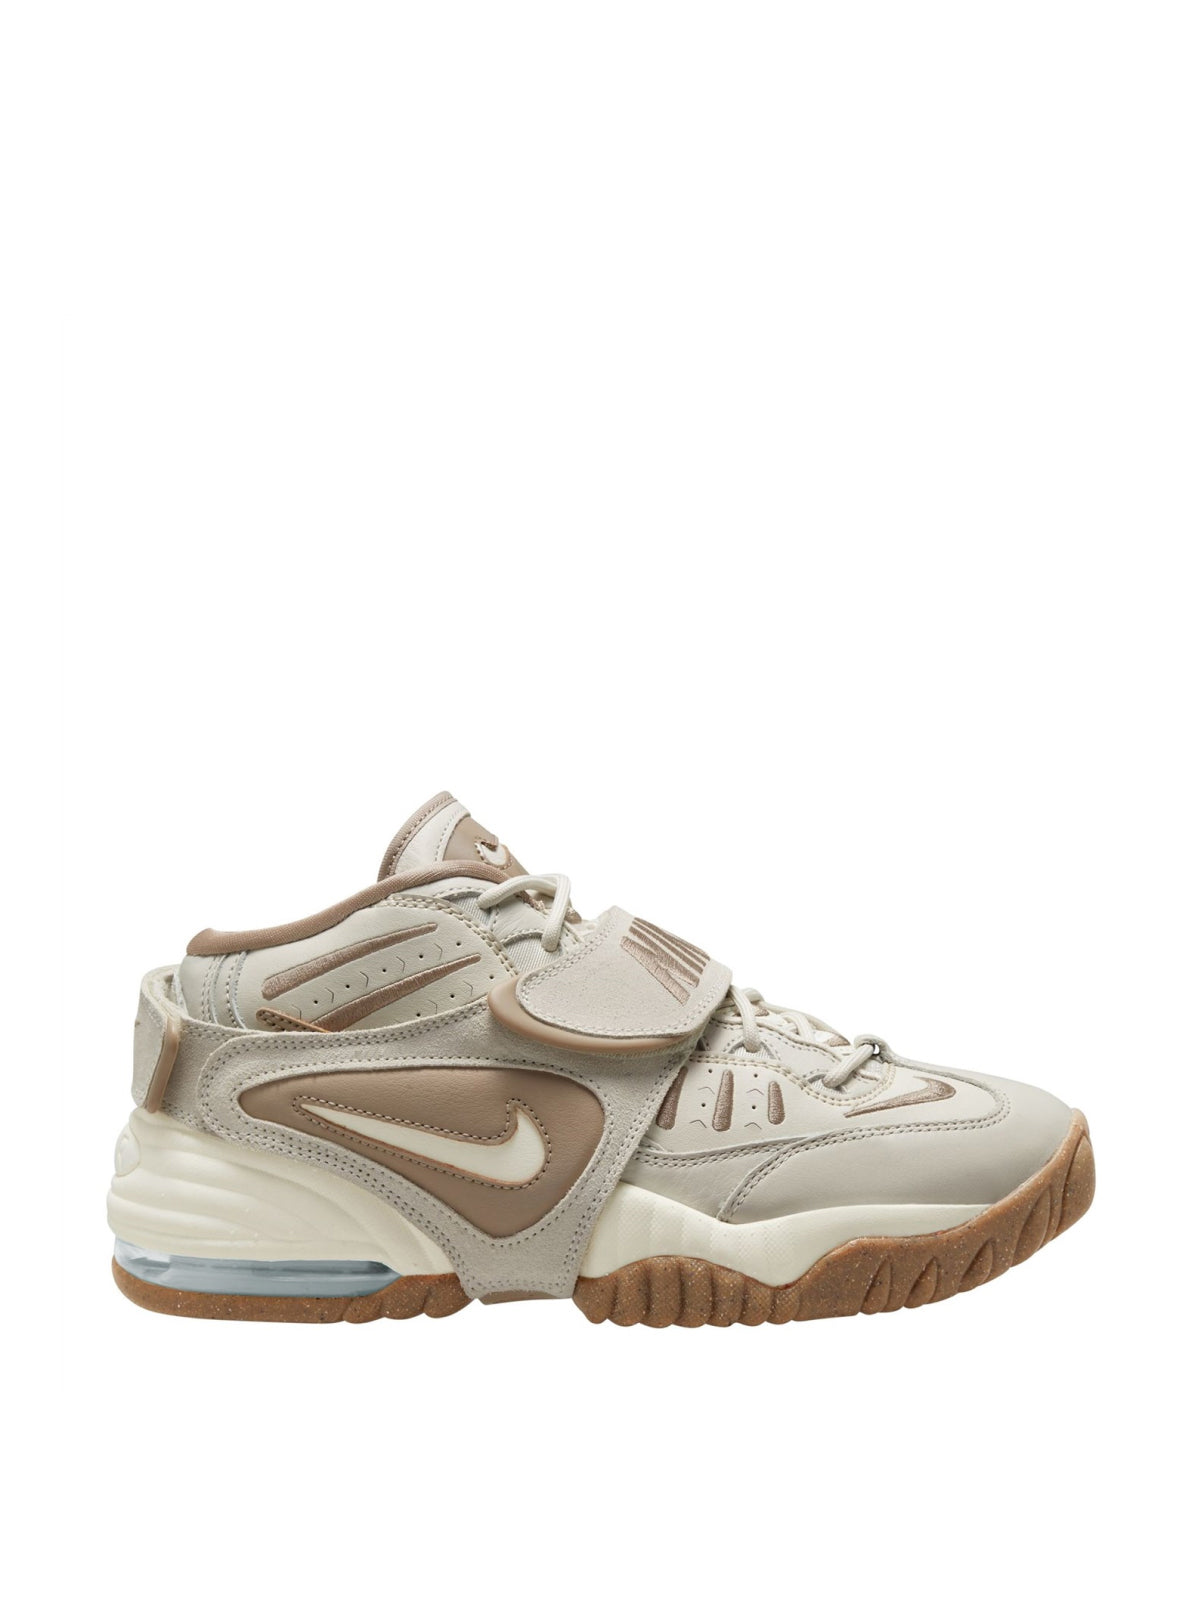 Nike-OUTLET-SALE-Air Adjust Force Sneakers-ARCHIVIST